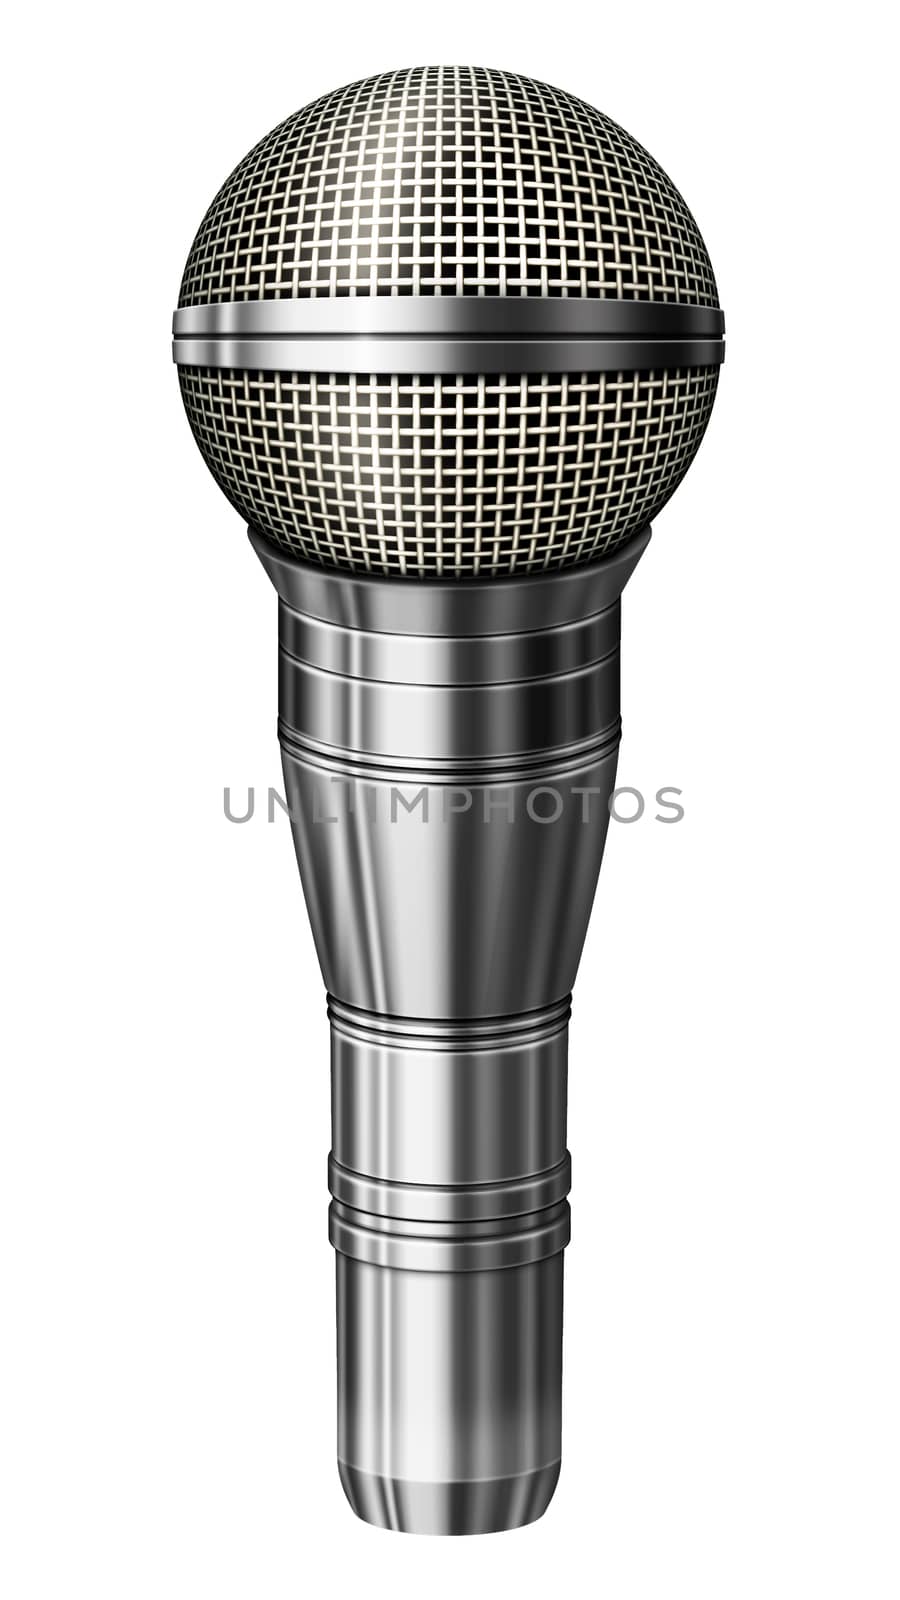 Digital illustration of a microphone with a silver casing. Isolated from any background. 3D illustration.